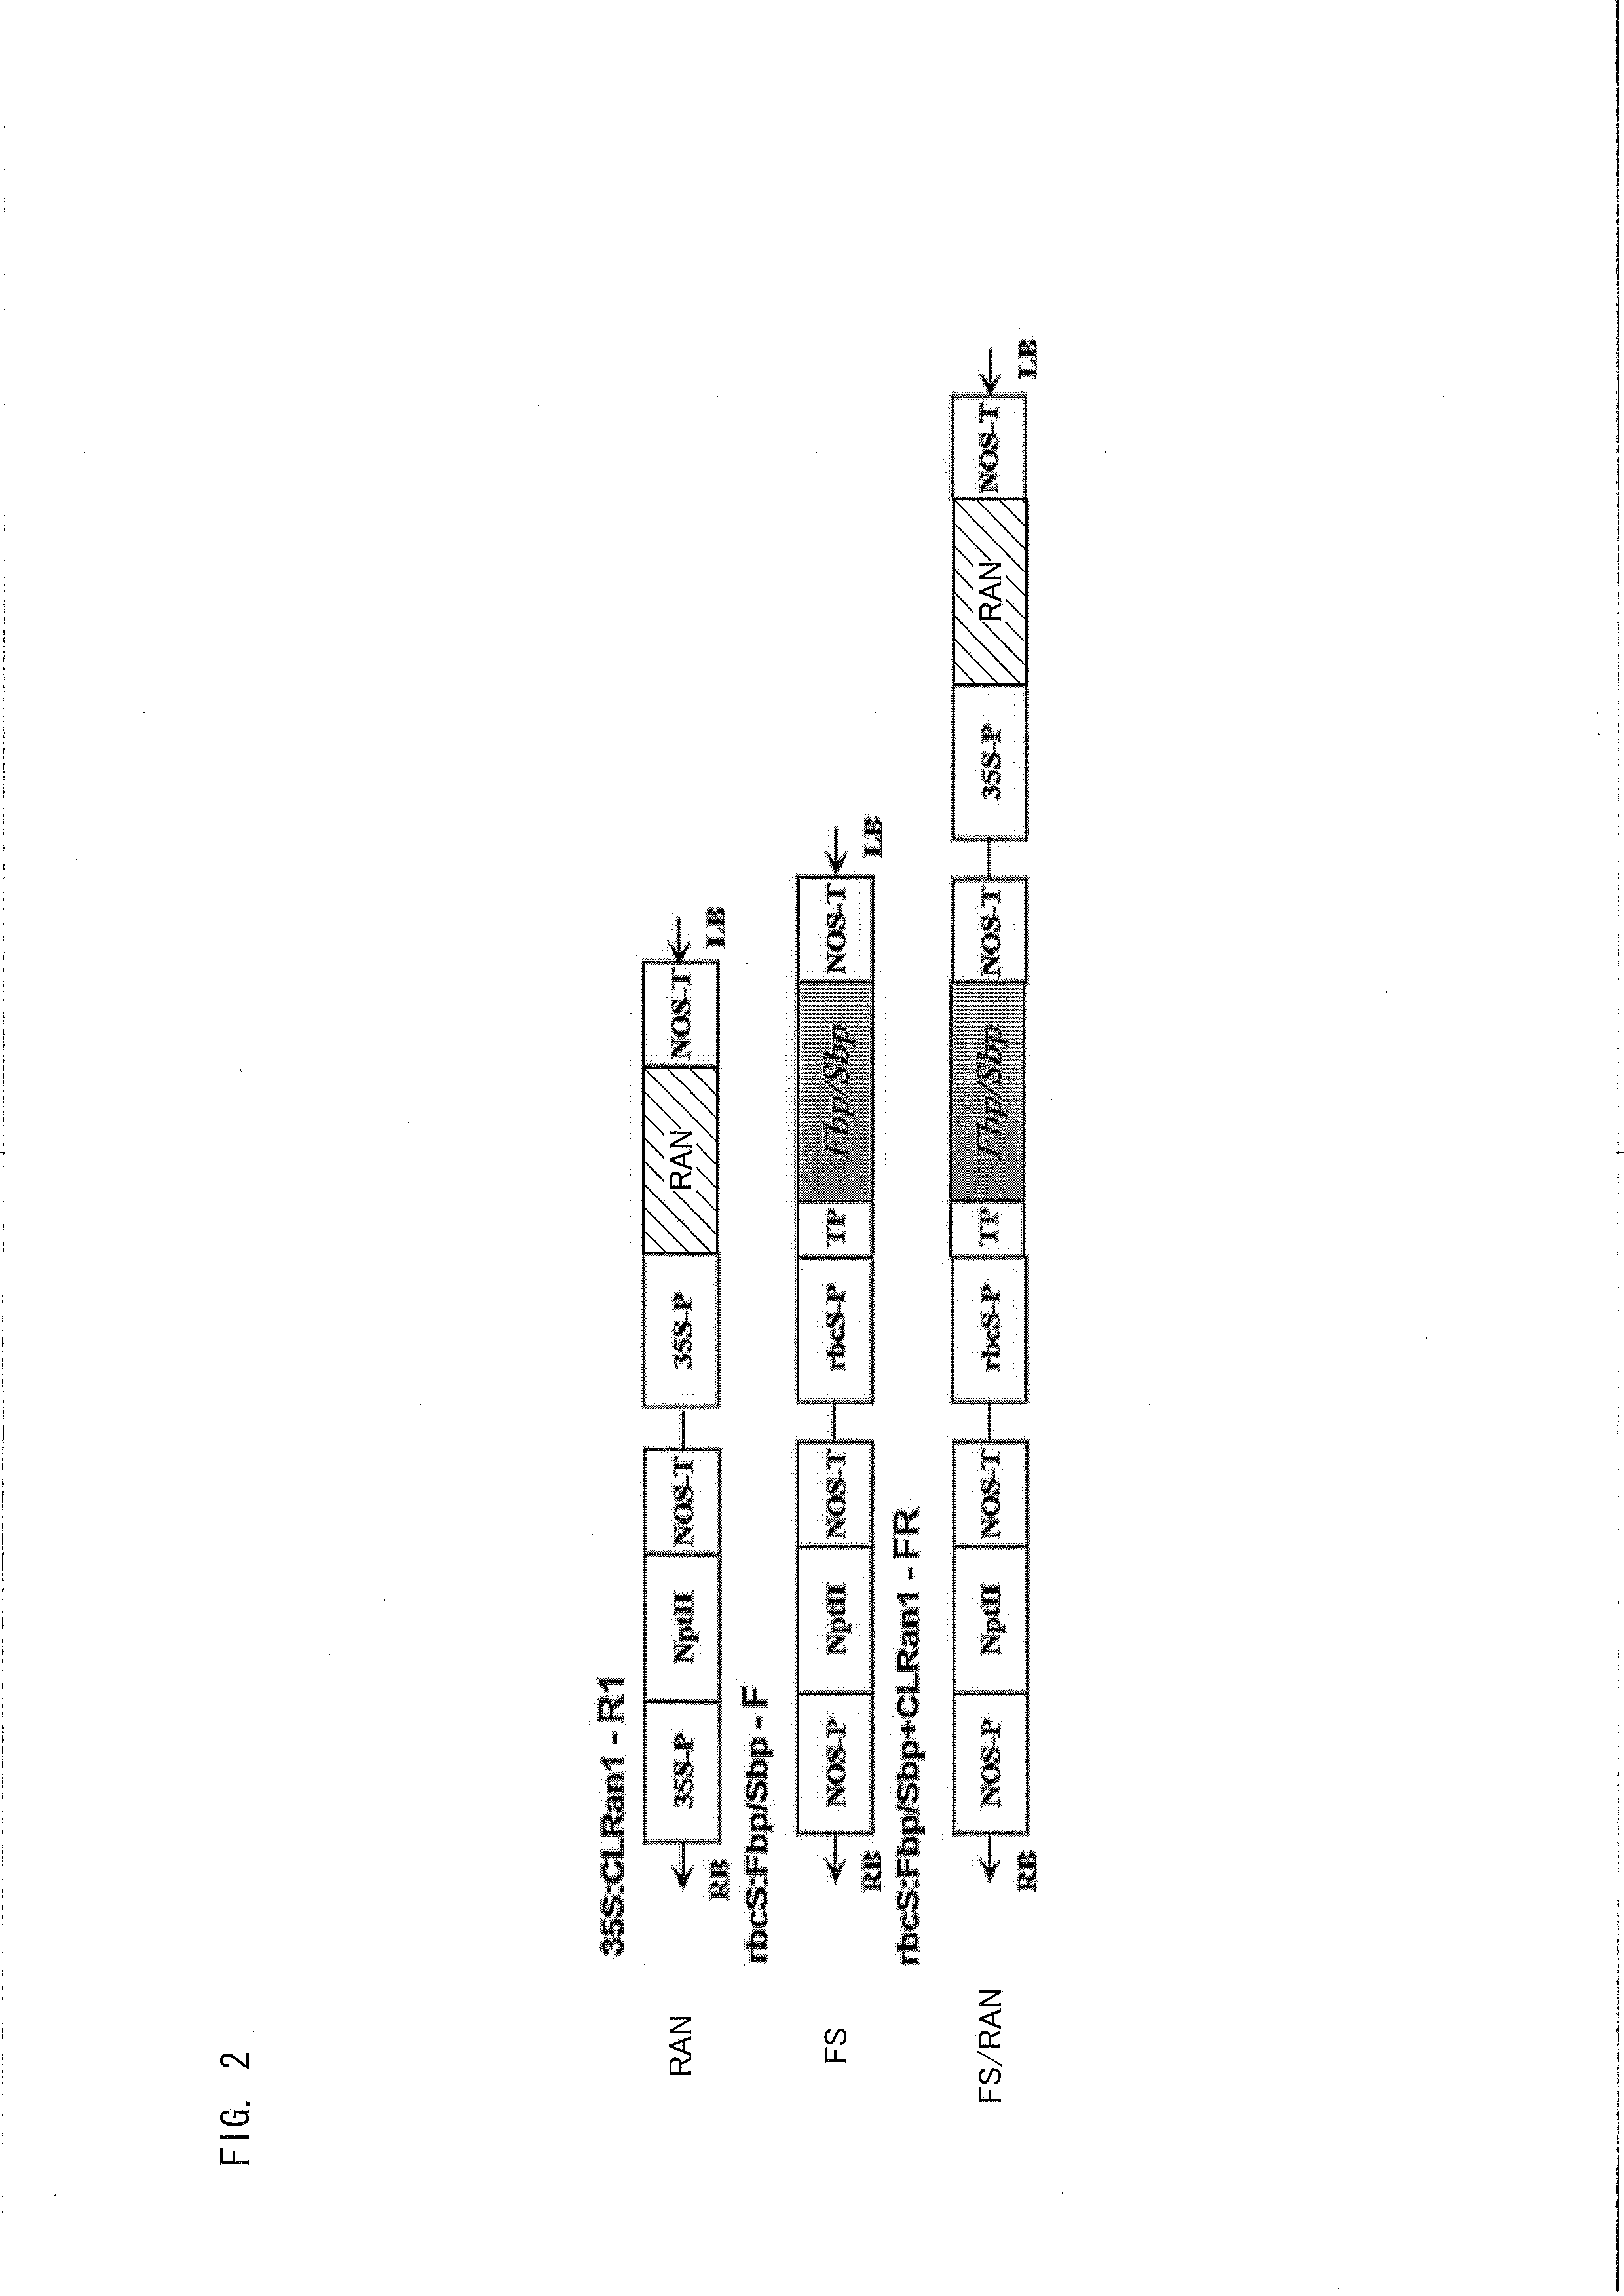 Method for production of stolon-forming plant having improved tuber production ability or stolon production ability compared with wild type, and stolon-forming plant produced by the method